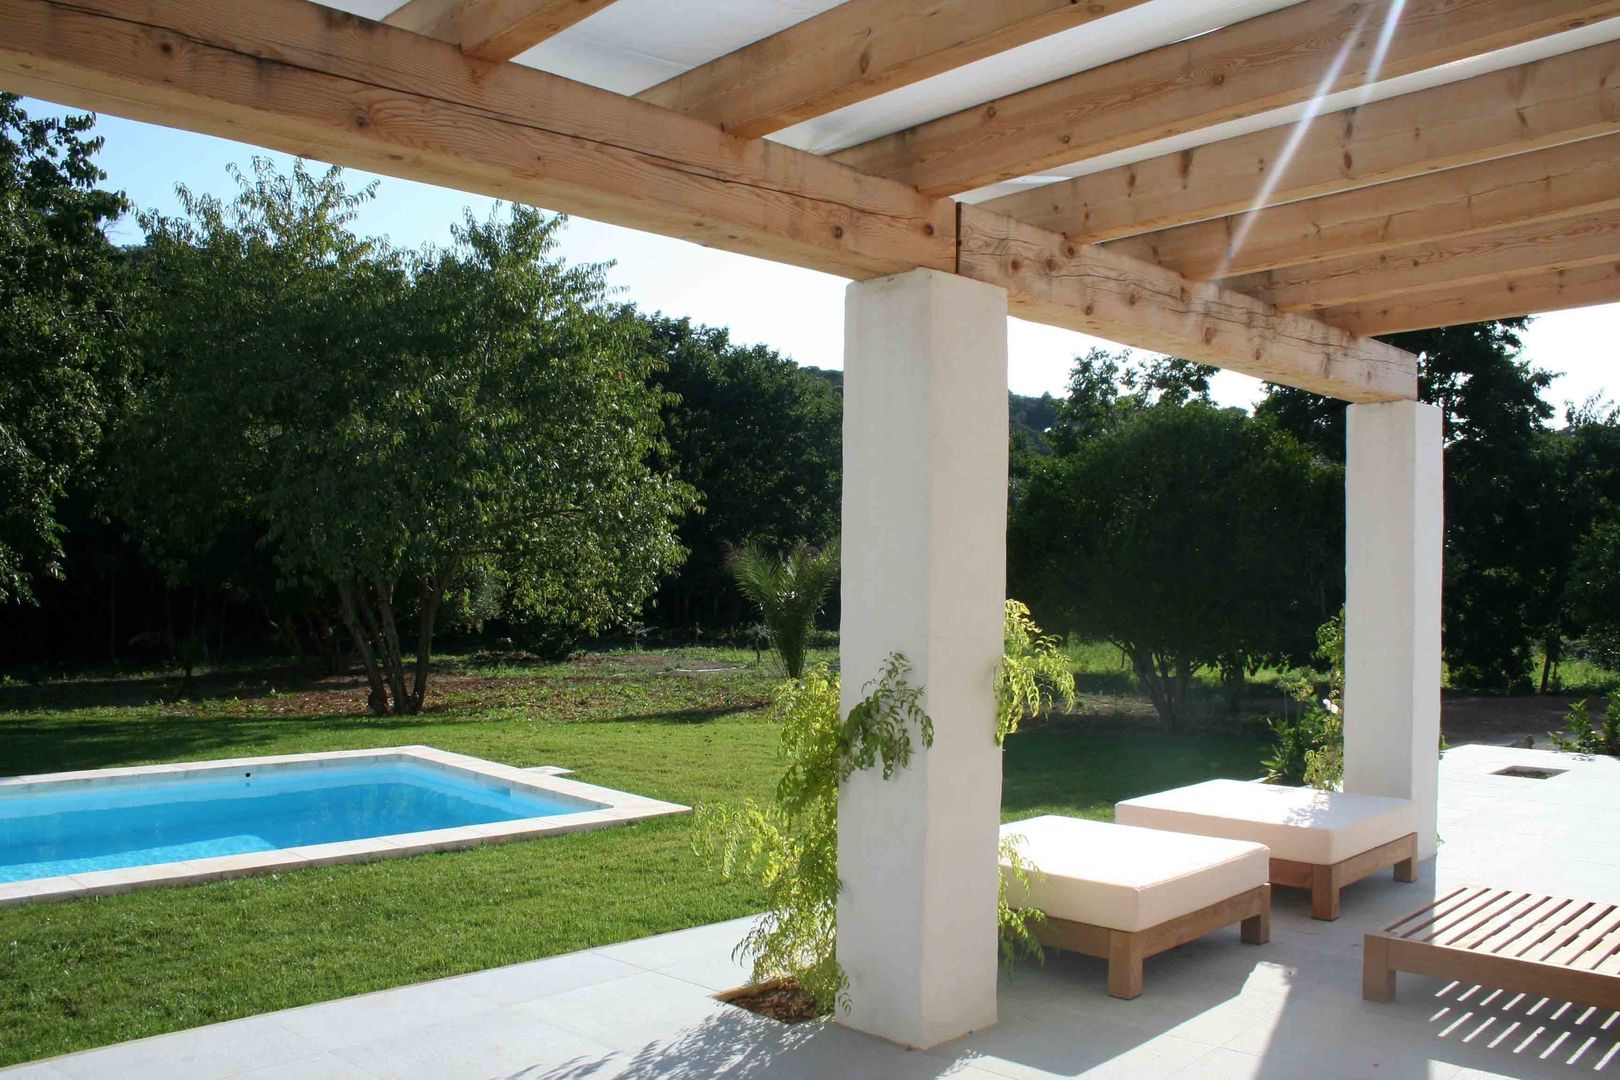 Terrace facing the garden with swimming pool FG ARQUITECTES 露臺